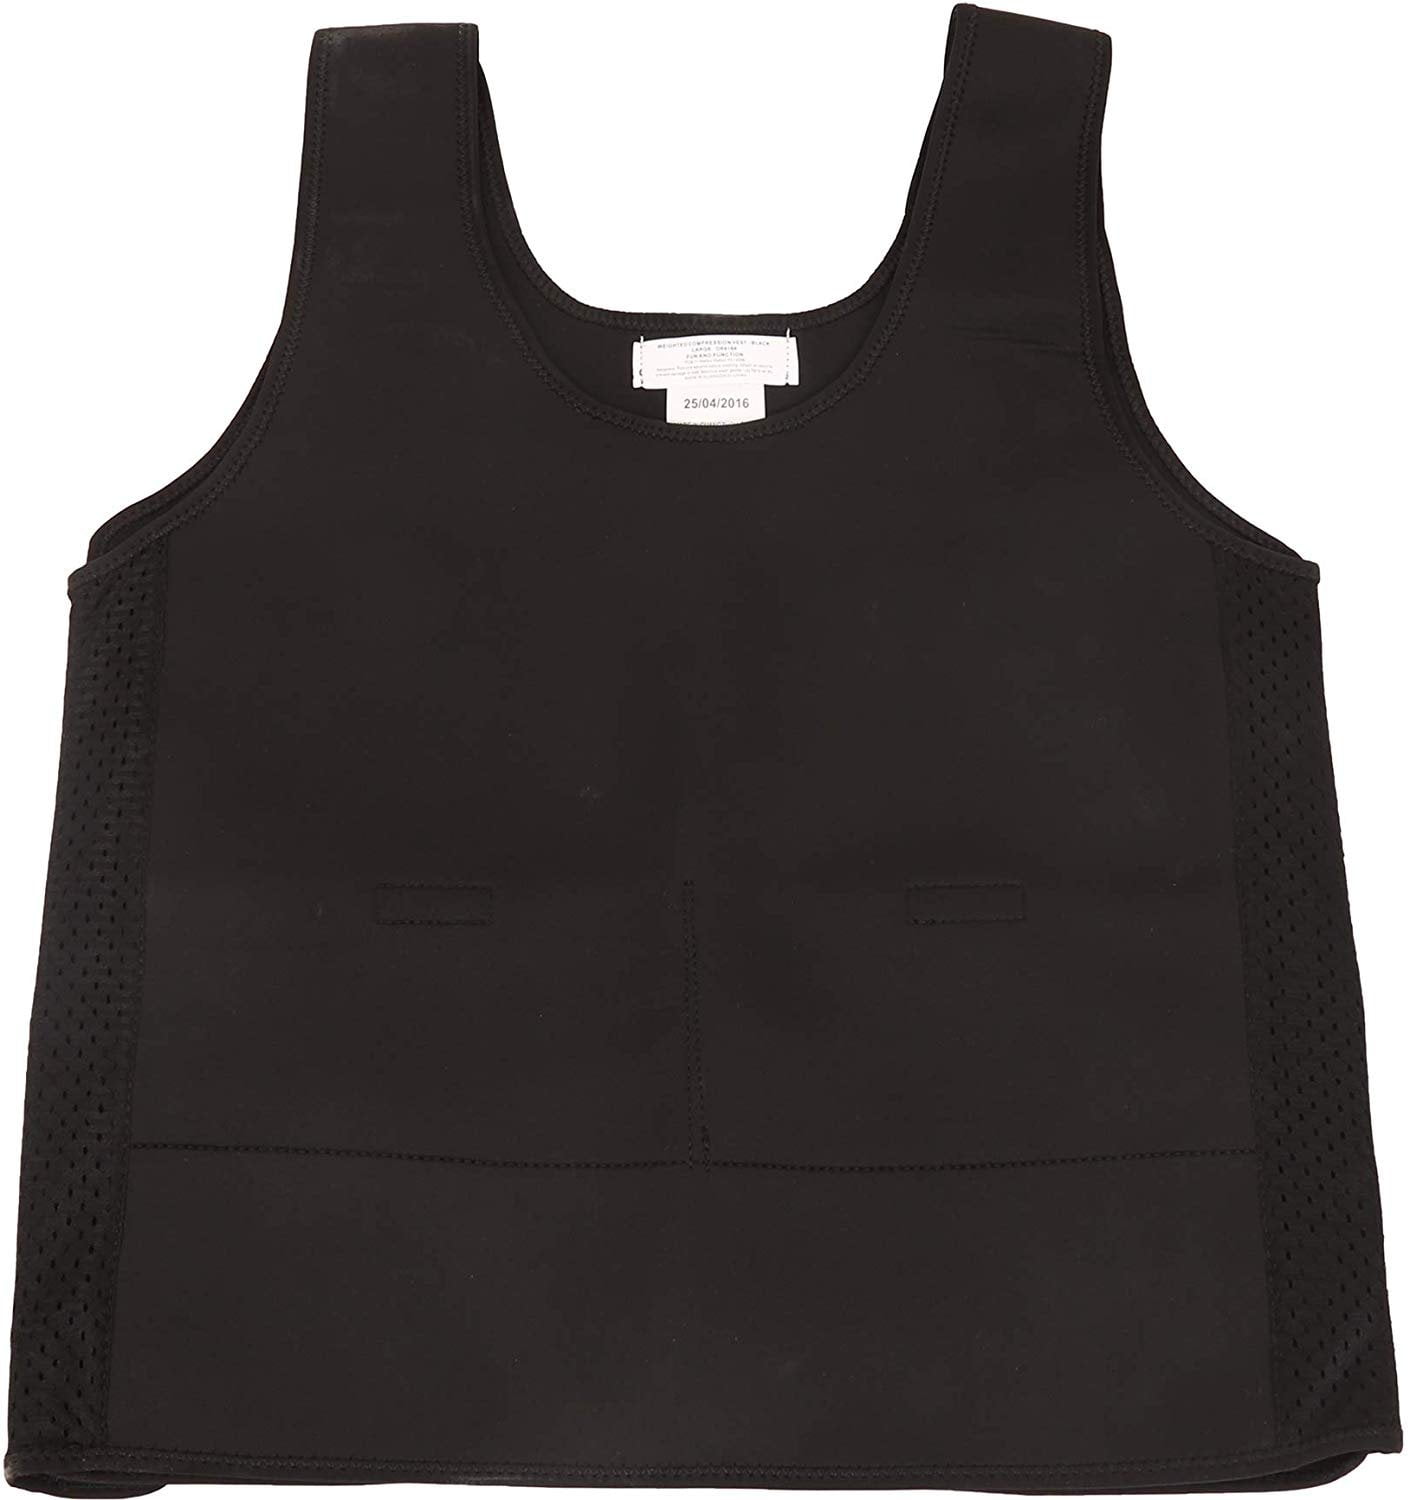 Weighted Compression Vest - Black - Helps with Mood & Attention